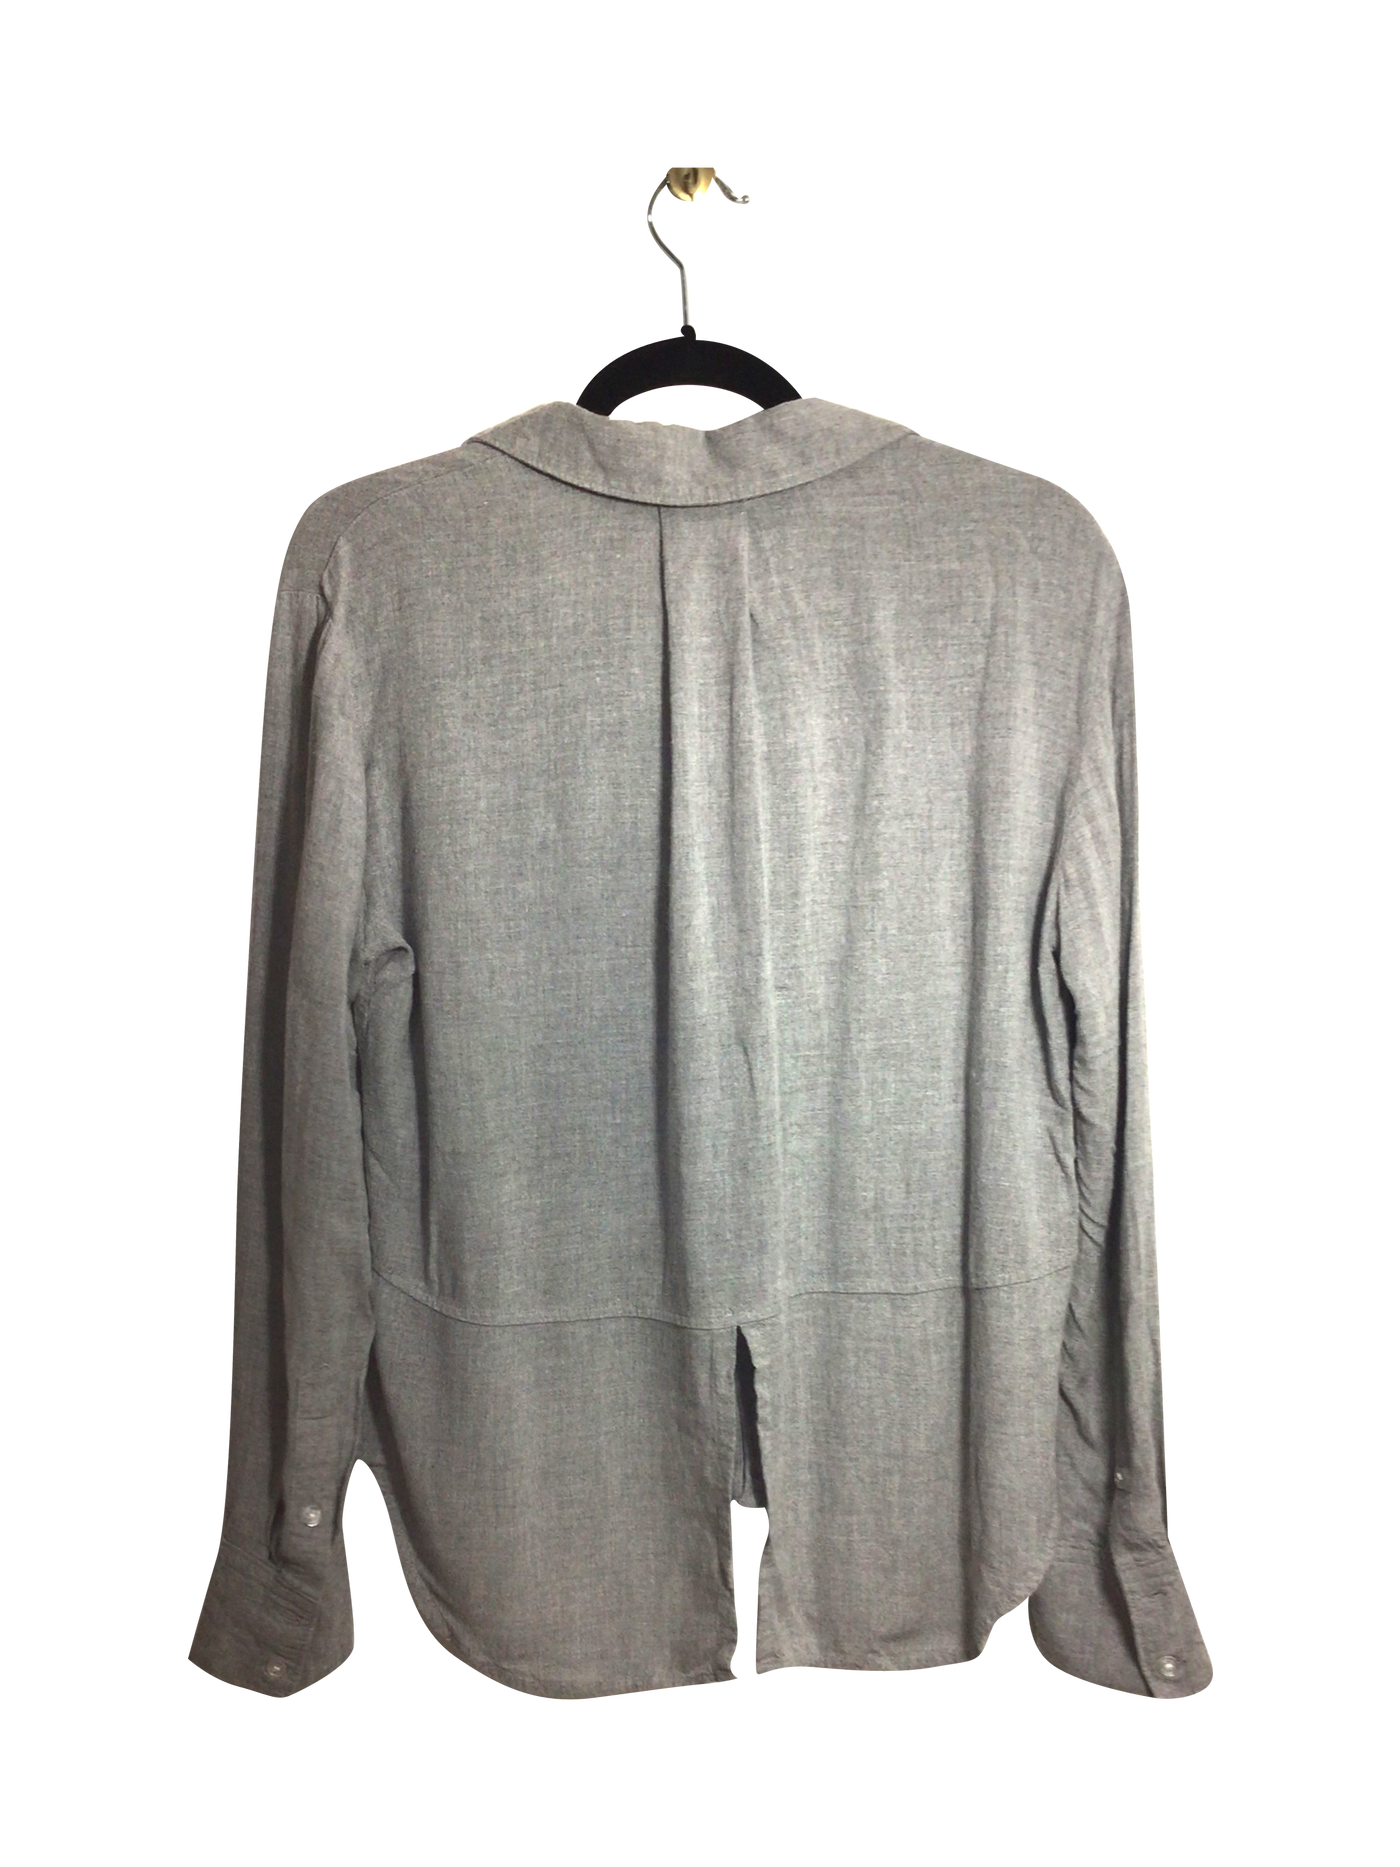 CLOTH & STONE Women Button Down Tops Regular fit in Gray - Size S | 24.59 $ KOOP